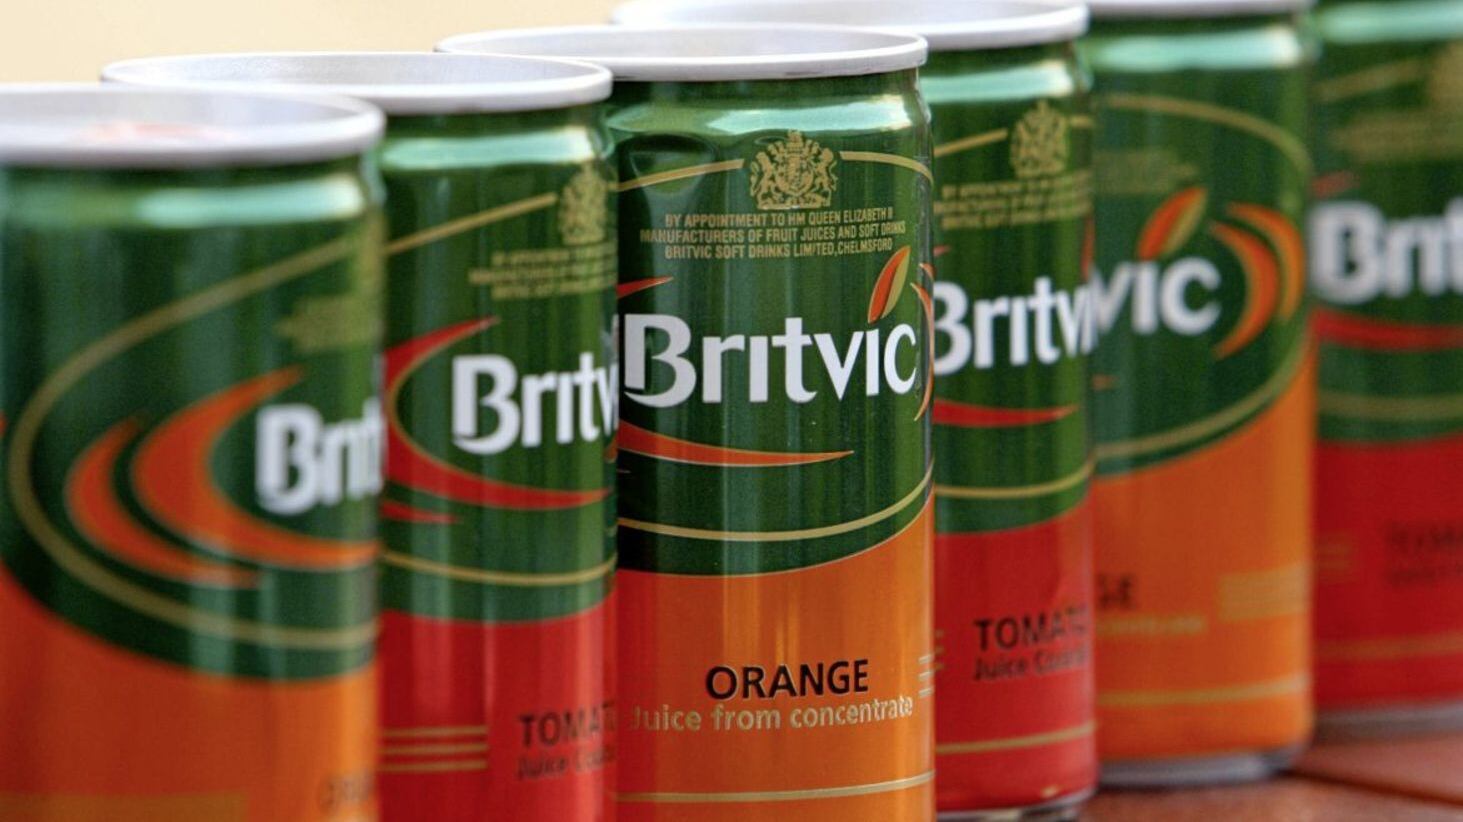 Soft drinks giant Britvic has put forward plans to shut its manufacturing site in Norwich, putting 242 jobs at risk 